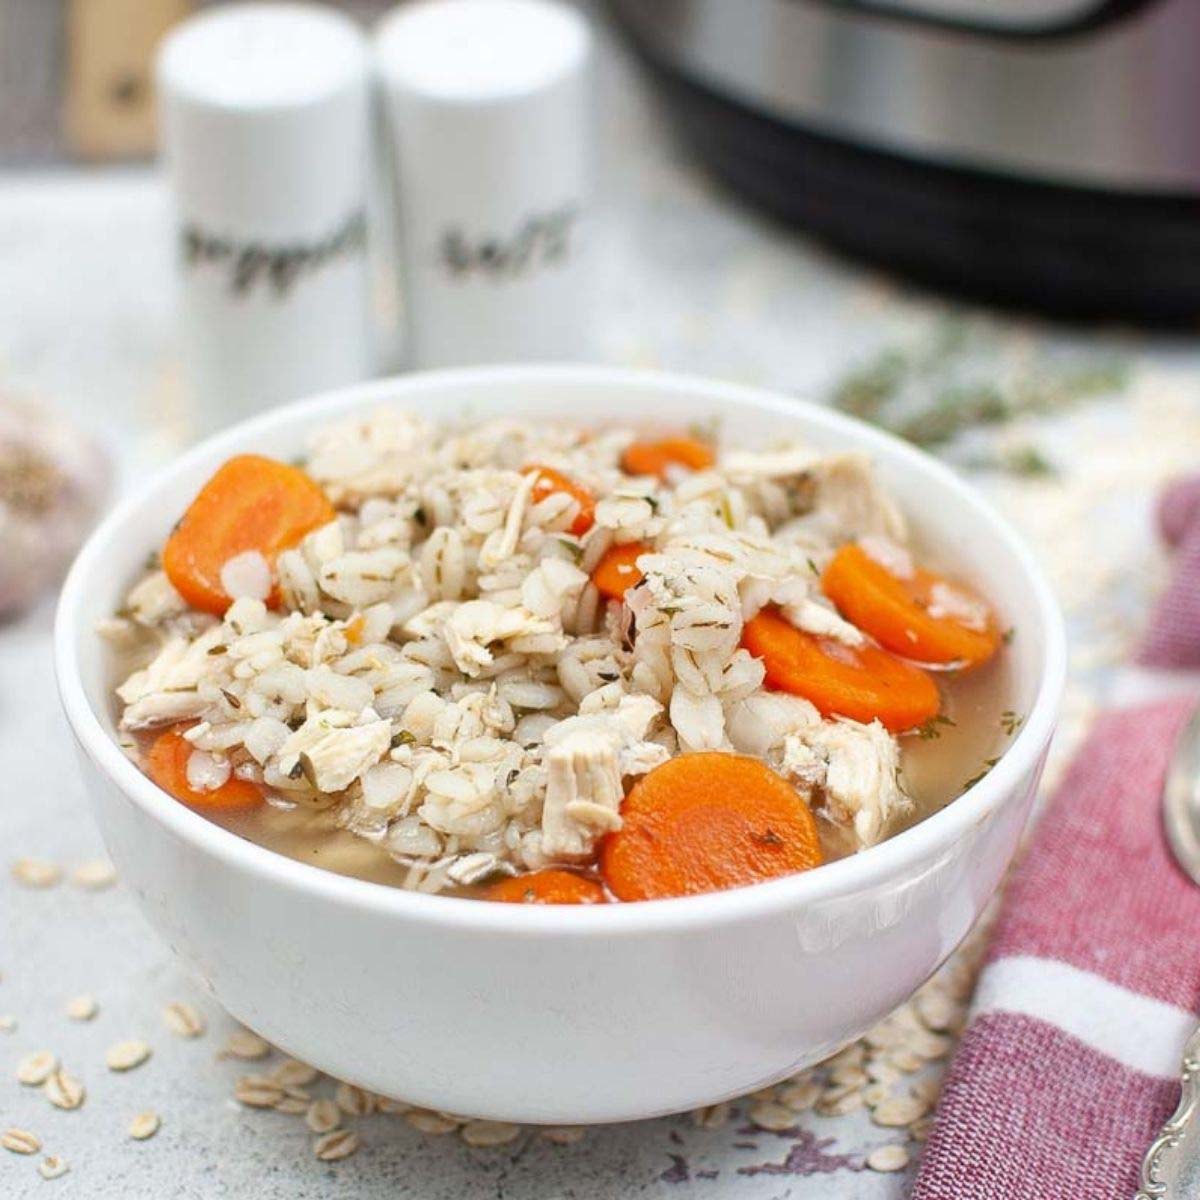 Thumbnail of Instant Pot chicken barley soup.